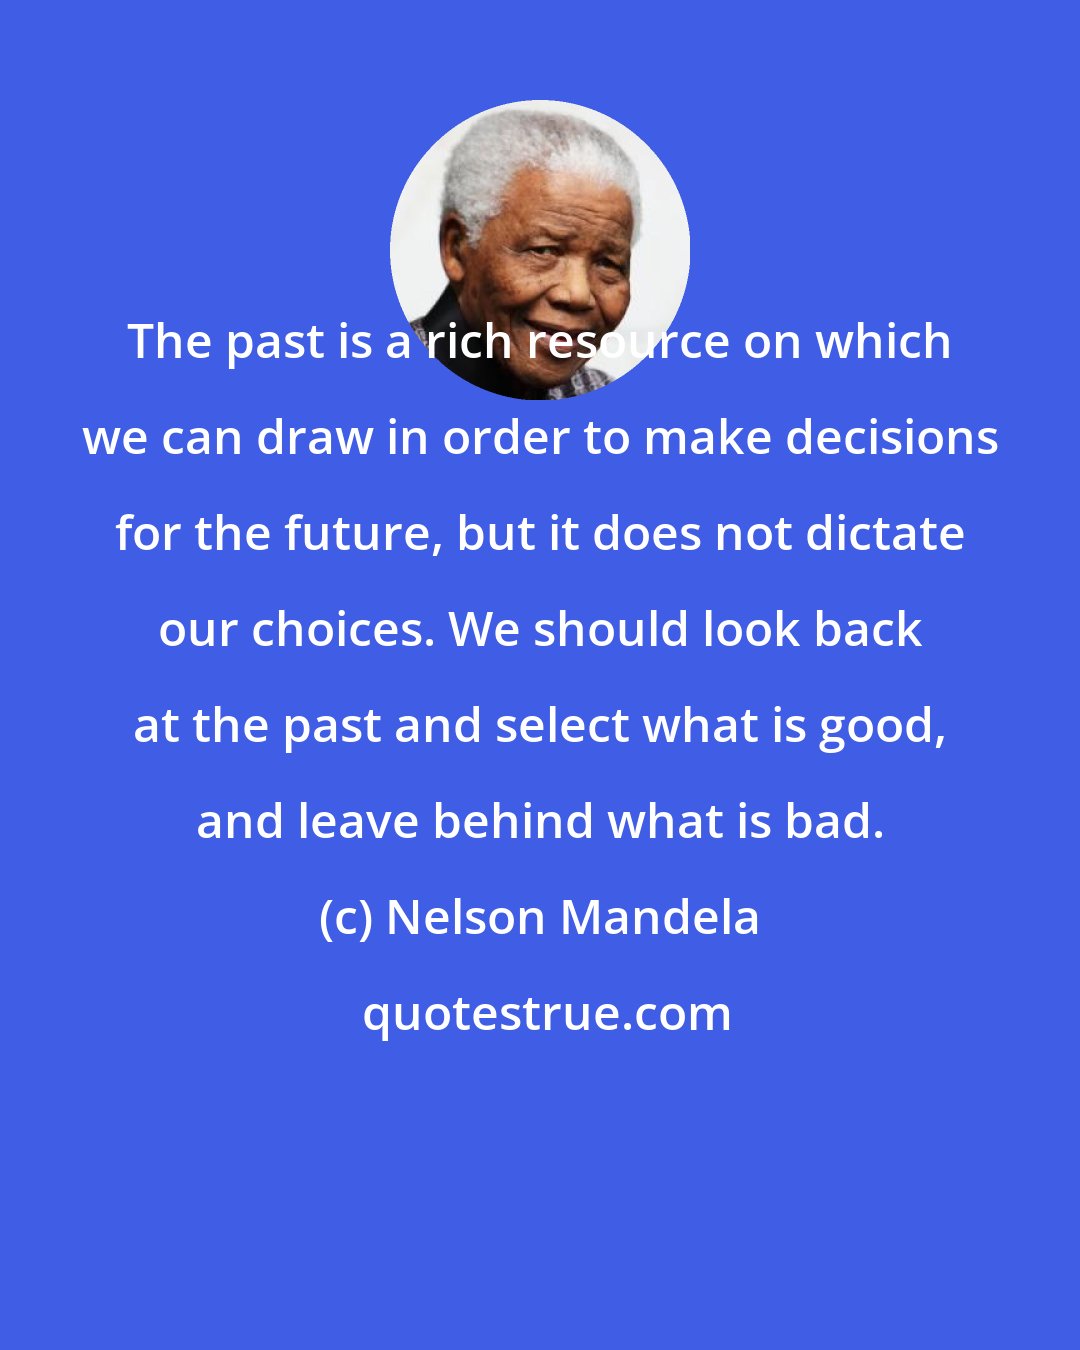 Nelson Mandela: The past is a rich resource on which we can draw in order to make decisions for the future, but it does not dictate our choices. We should look back at the past and select what is good, and leave behind what is bad.